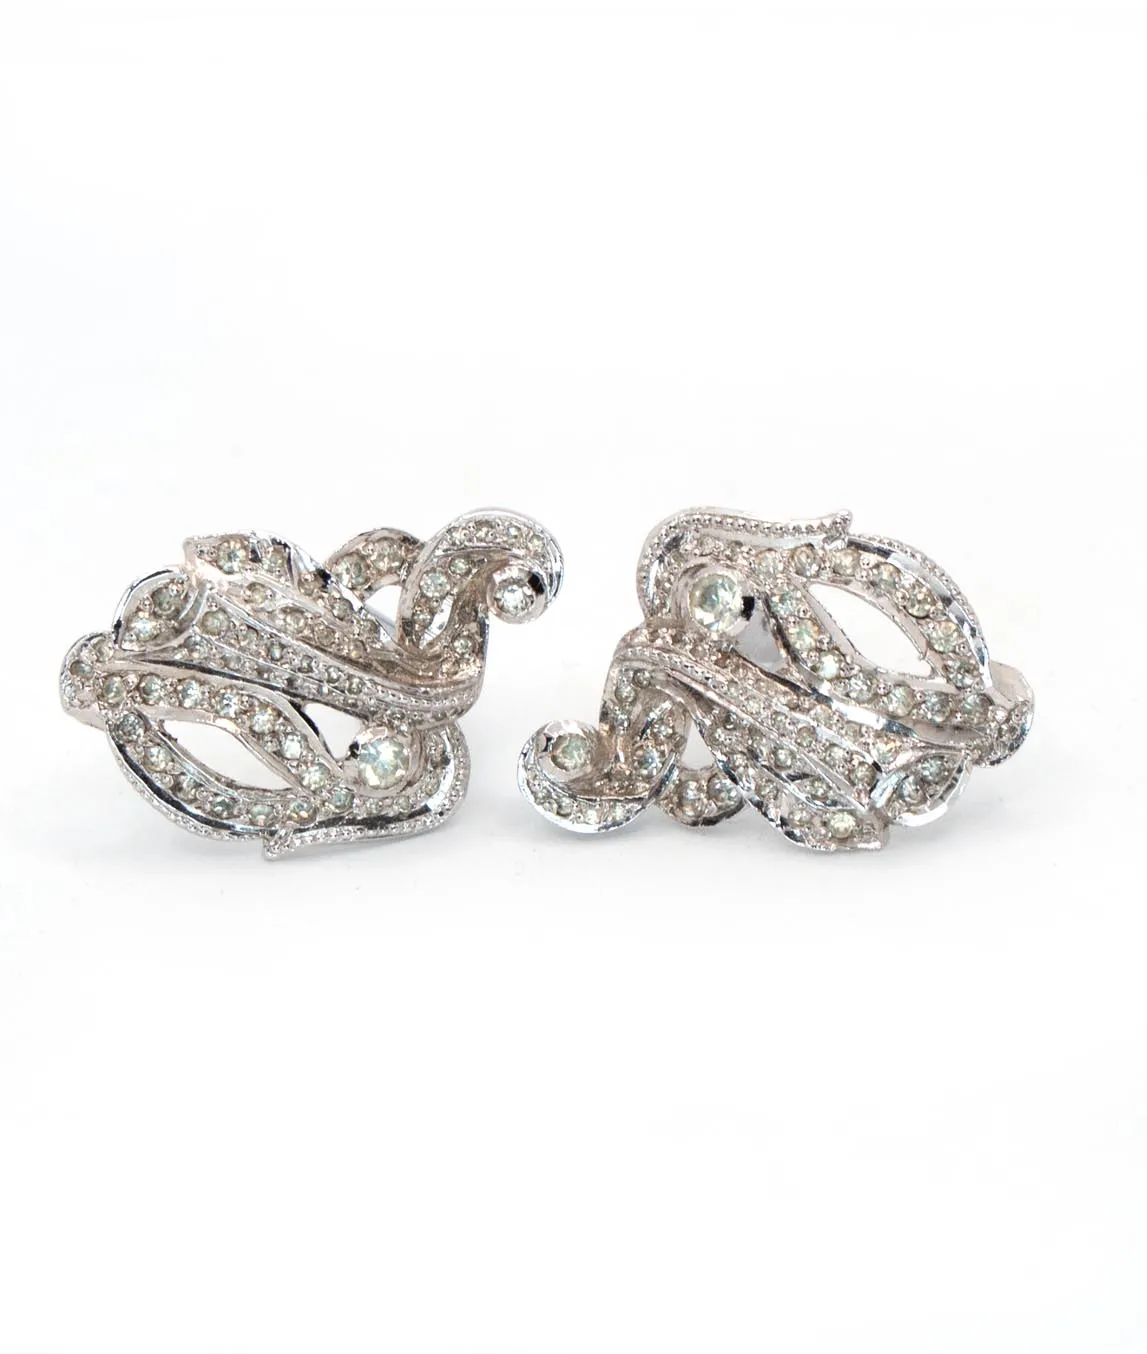 Two dress clips with clear crystals and rhodium plated metal